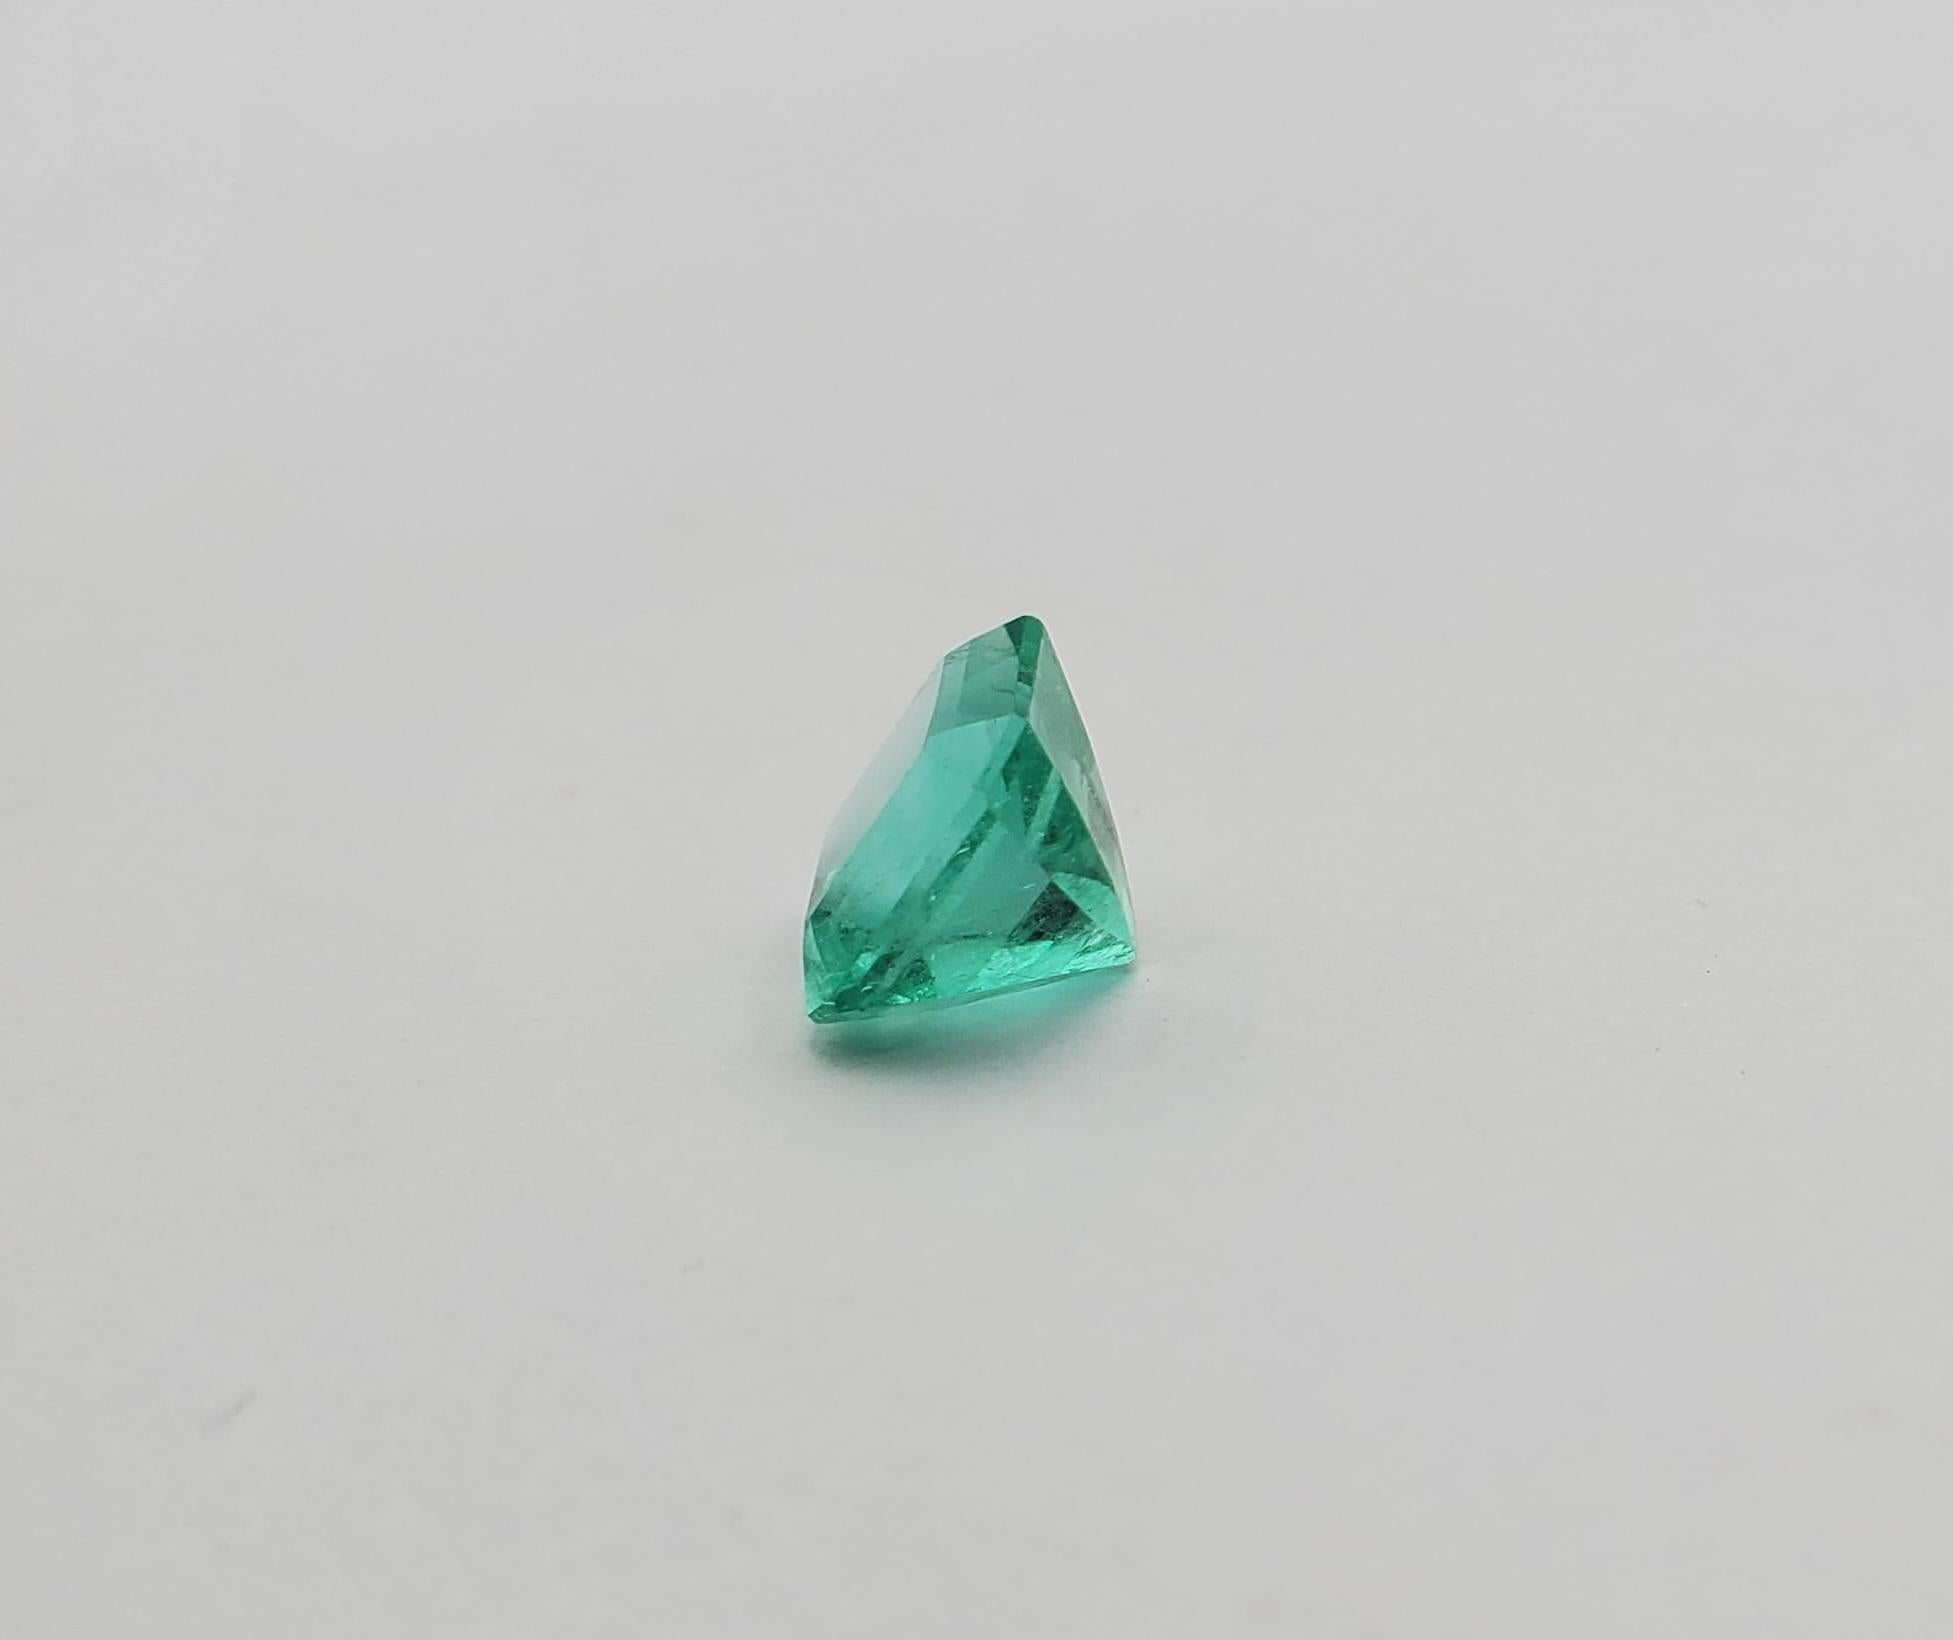 This 2.93 carat octagon shaped emerald is a gorgeous and remarkable gemstone. With measurements of 8.56 x 8.49 x 6.71 mm, it falls into a size category that is substantial enough to command attention when worn, yet can be comfortably set into fine